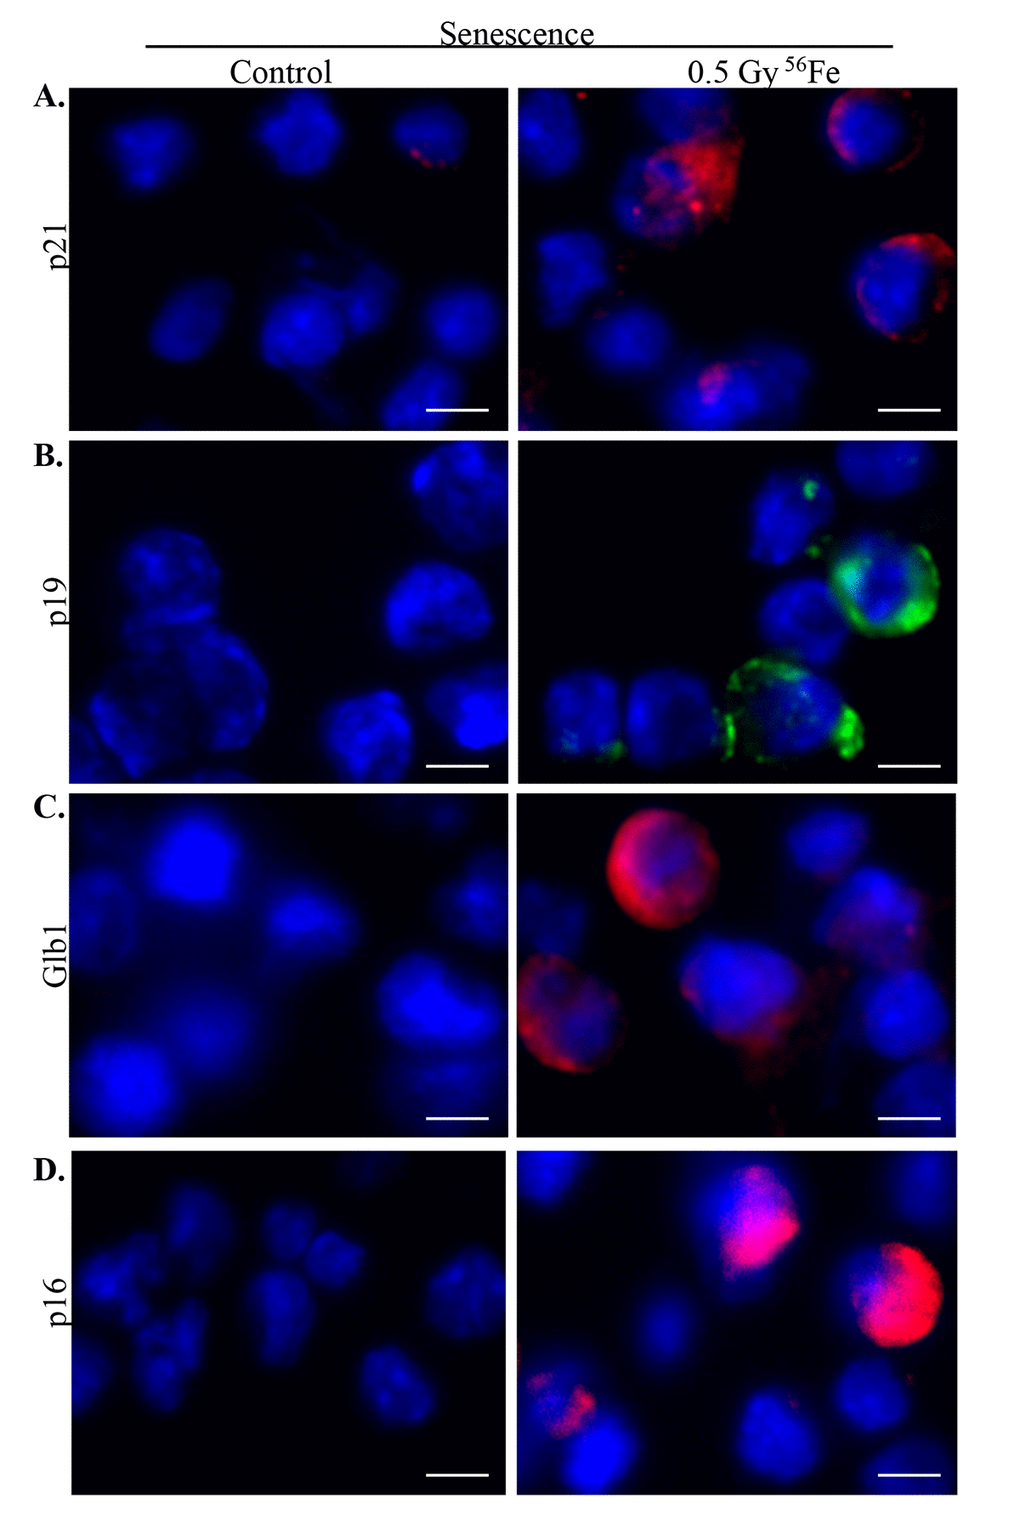 Increased senescence in murine ISCs after heavy ion radiation exposure. (A) Representative IF images showing increased p21 expression in ISCs from heavy ion radiation exposed mice. (B) Increased p19 expression in ISCs from heavy ion radiation exposed mice. (C) ISC sections immunofluorescently stained for Glb1 show increased staining in irradiated samples. (D) Representative IF images showing increased p16 levels in ISCs from heavy ion radiation exposed mice. Scale bar, 5 μm.